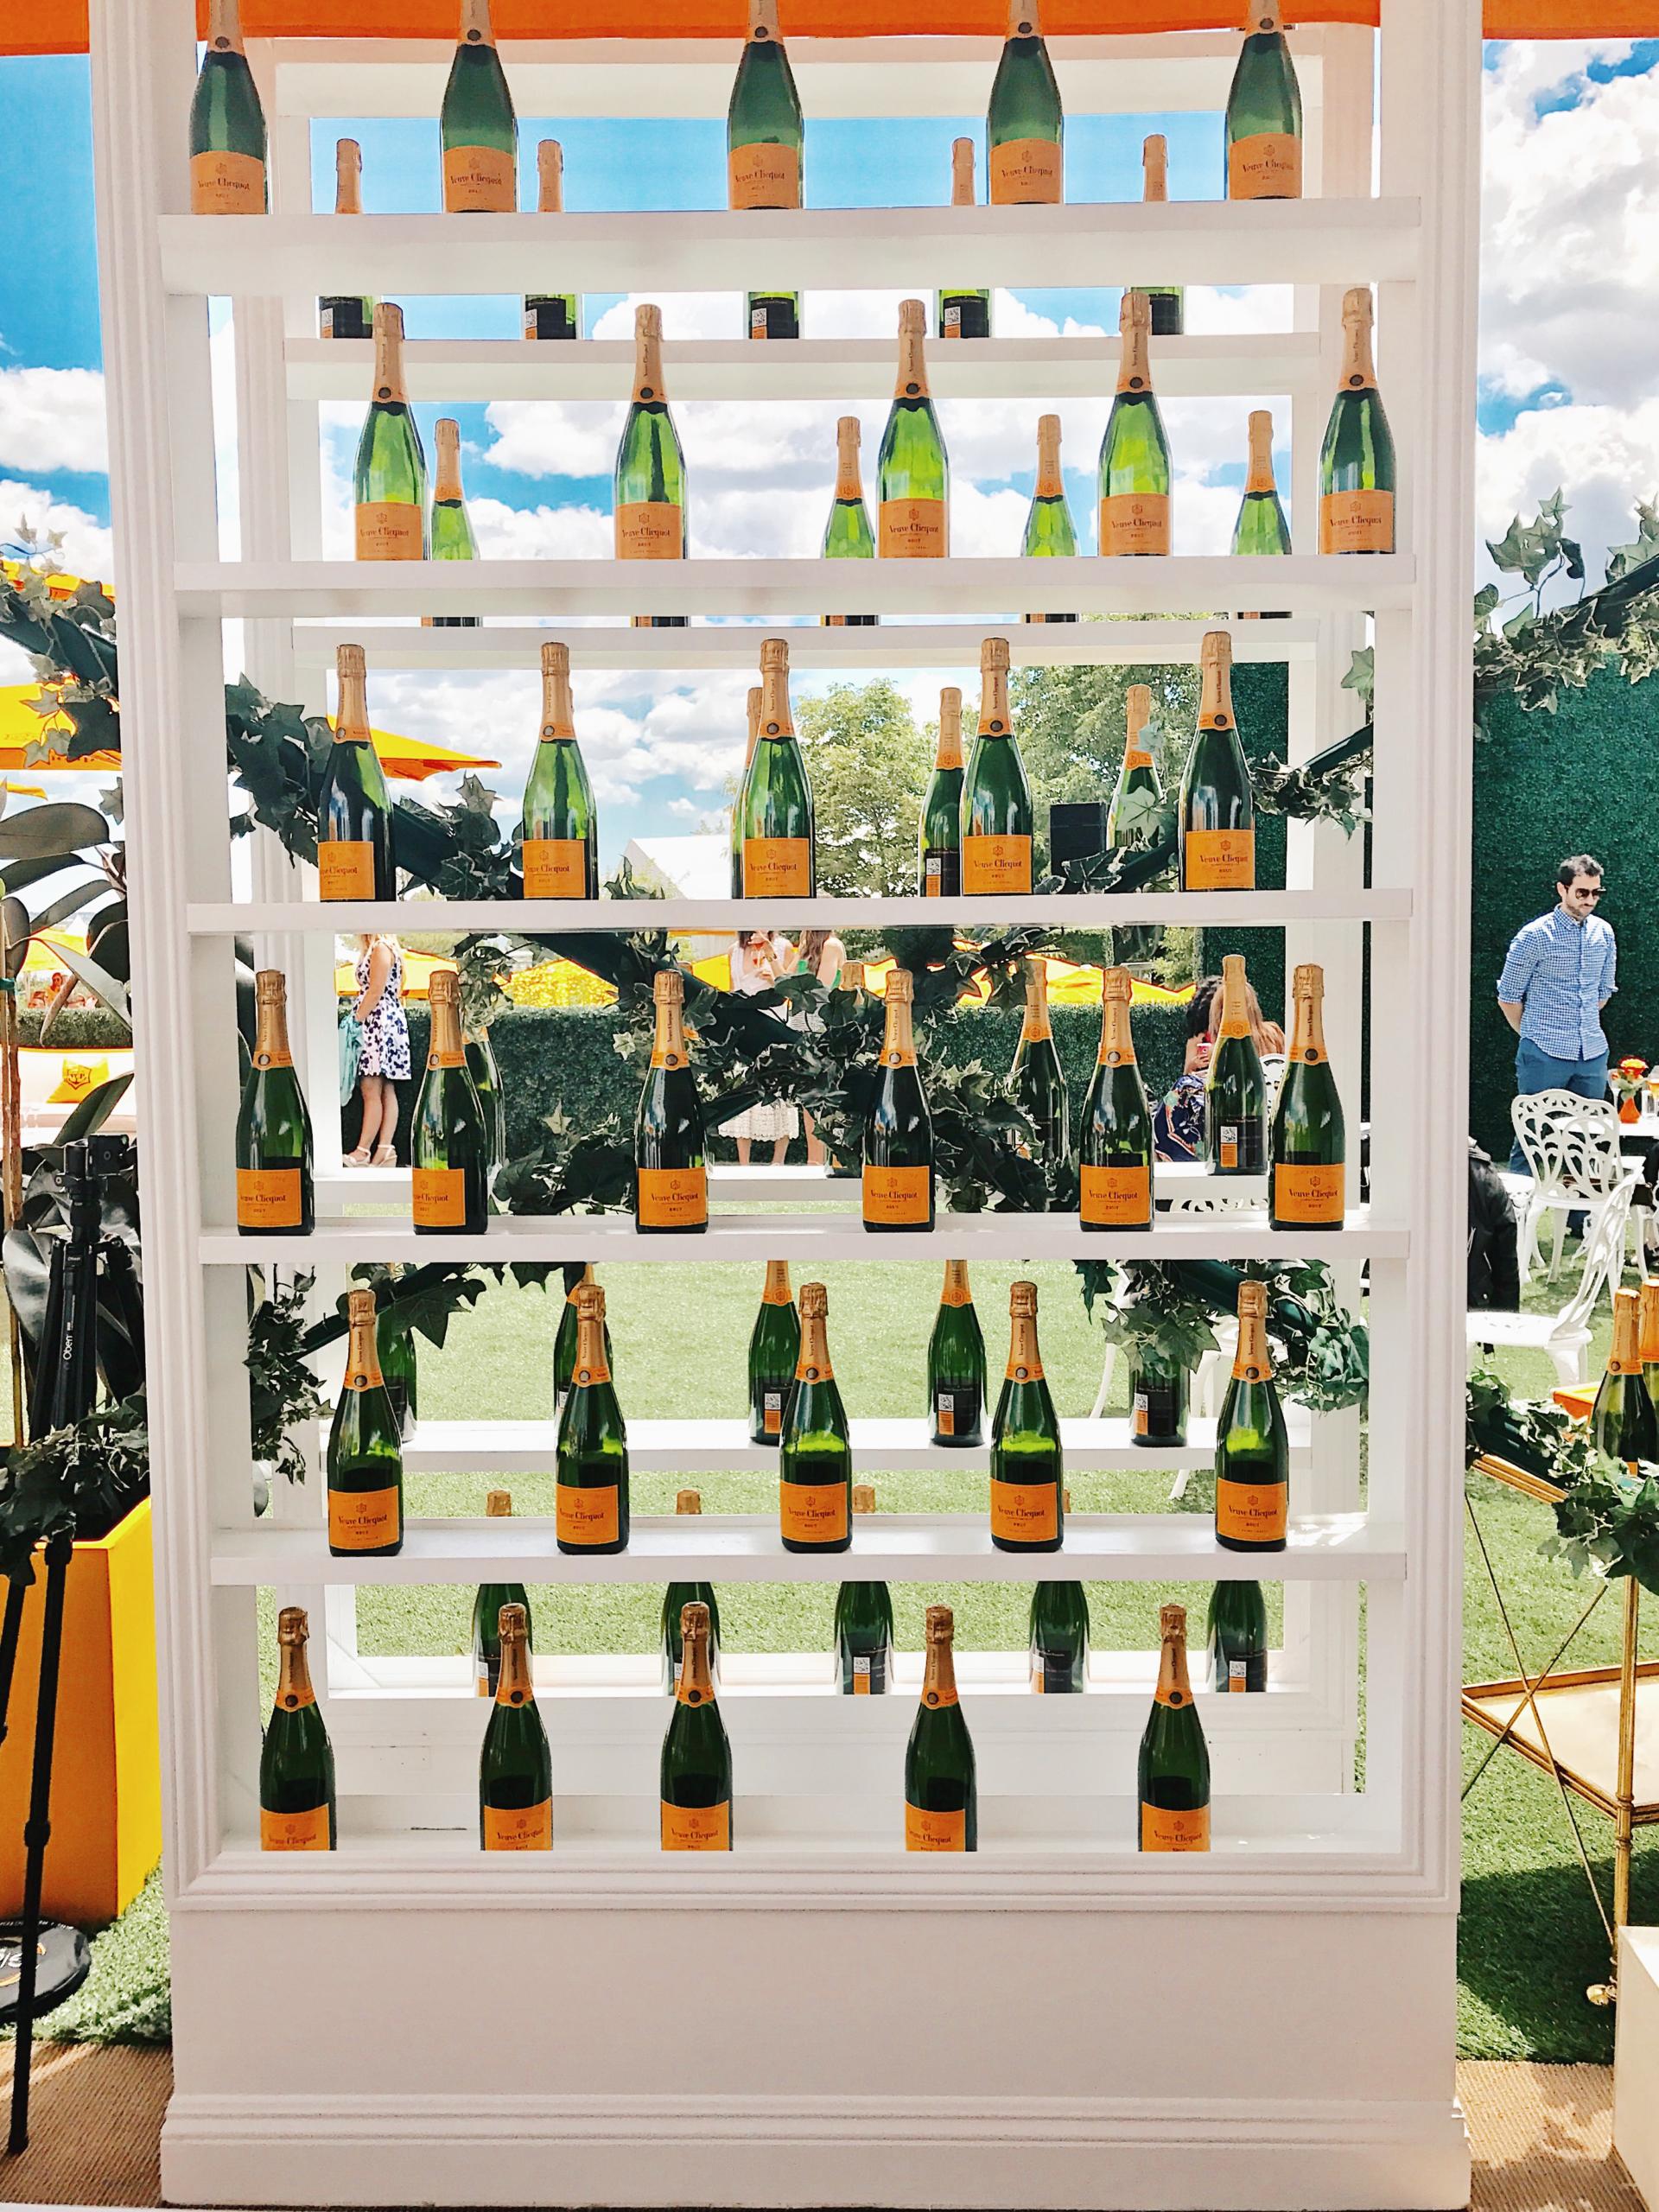 Veuve Clicquot Polo Classic // The Girl From Panama